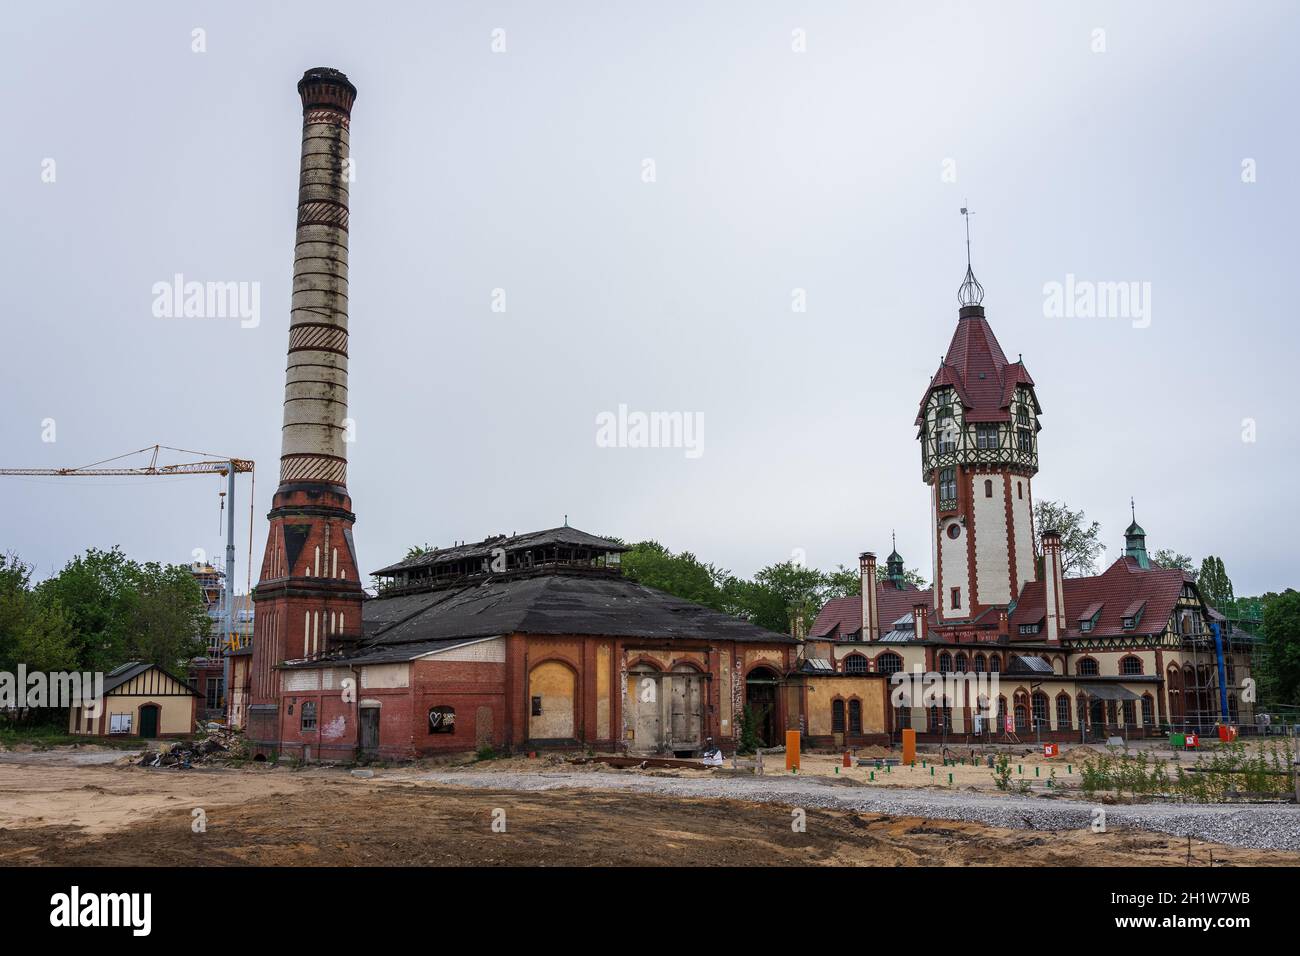 BEELITZ, GERMANY - MAY 23, 2021: Complex of thermal power plant buildings built in 1898-1902. Since 1996, the building has been preserved as a technic Stock Photo